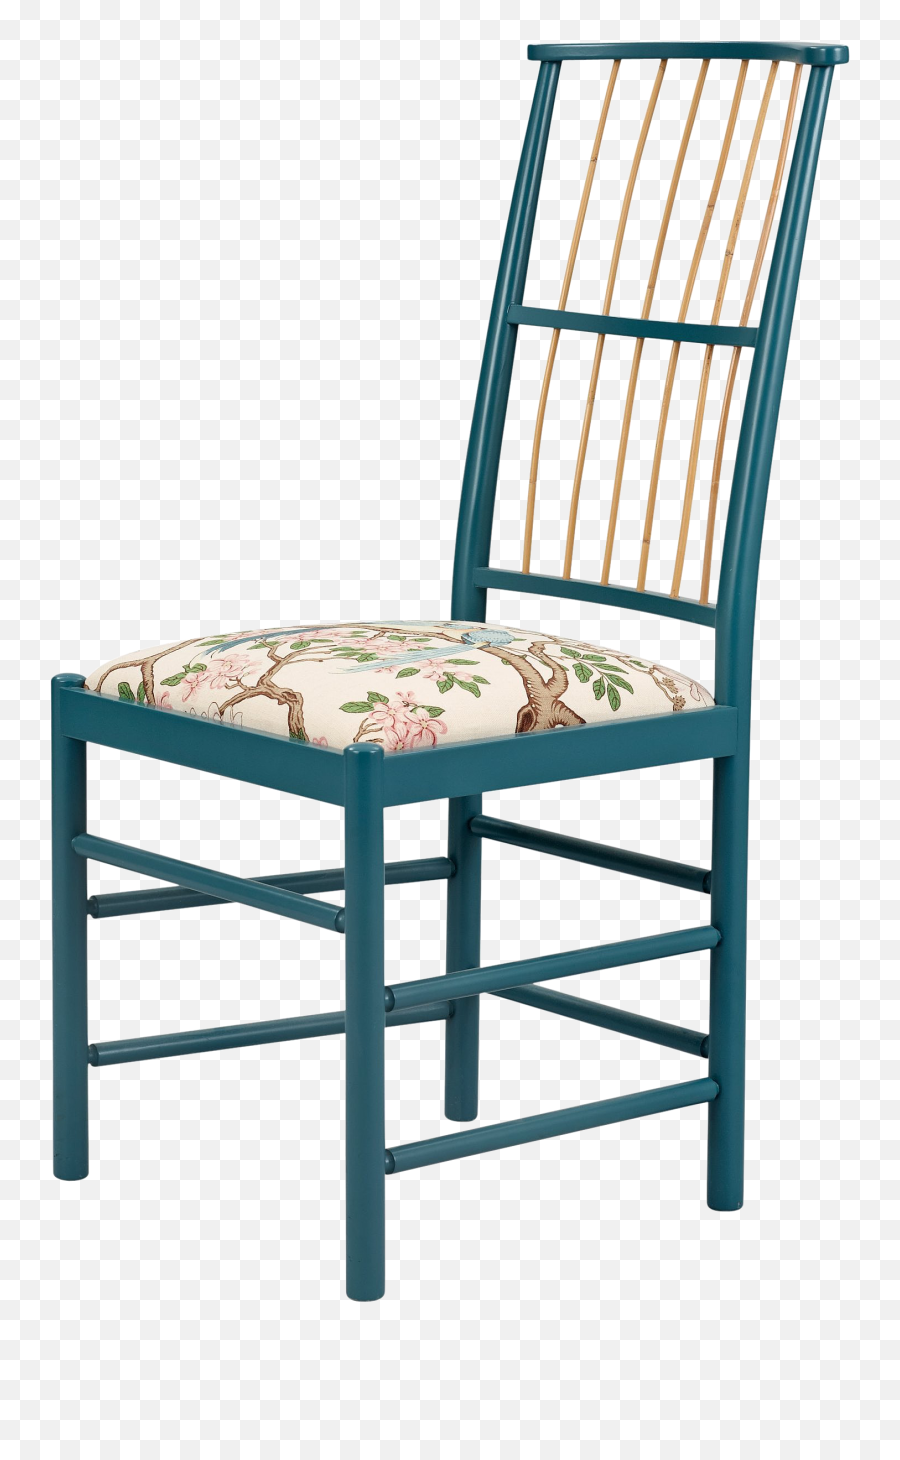 68 Chair Png Images For Free Download - Chair,Stool Png